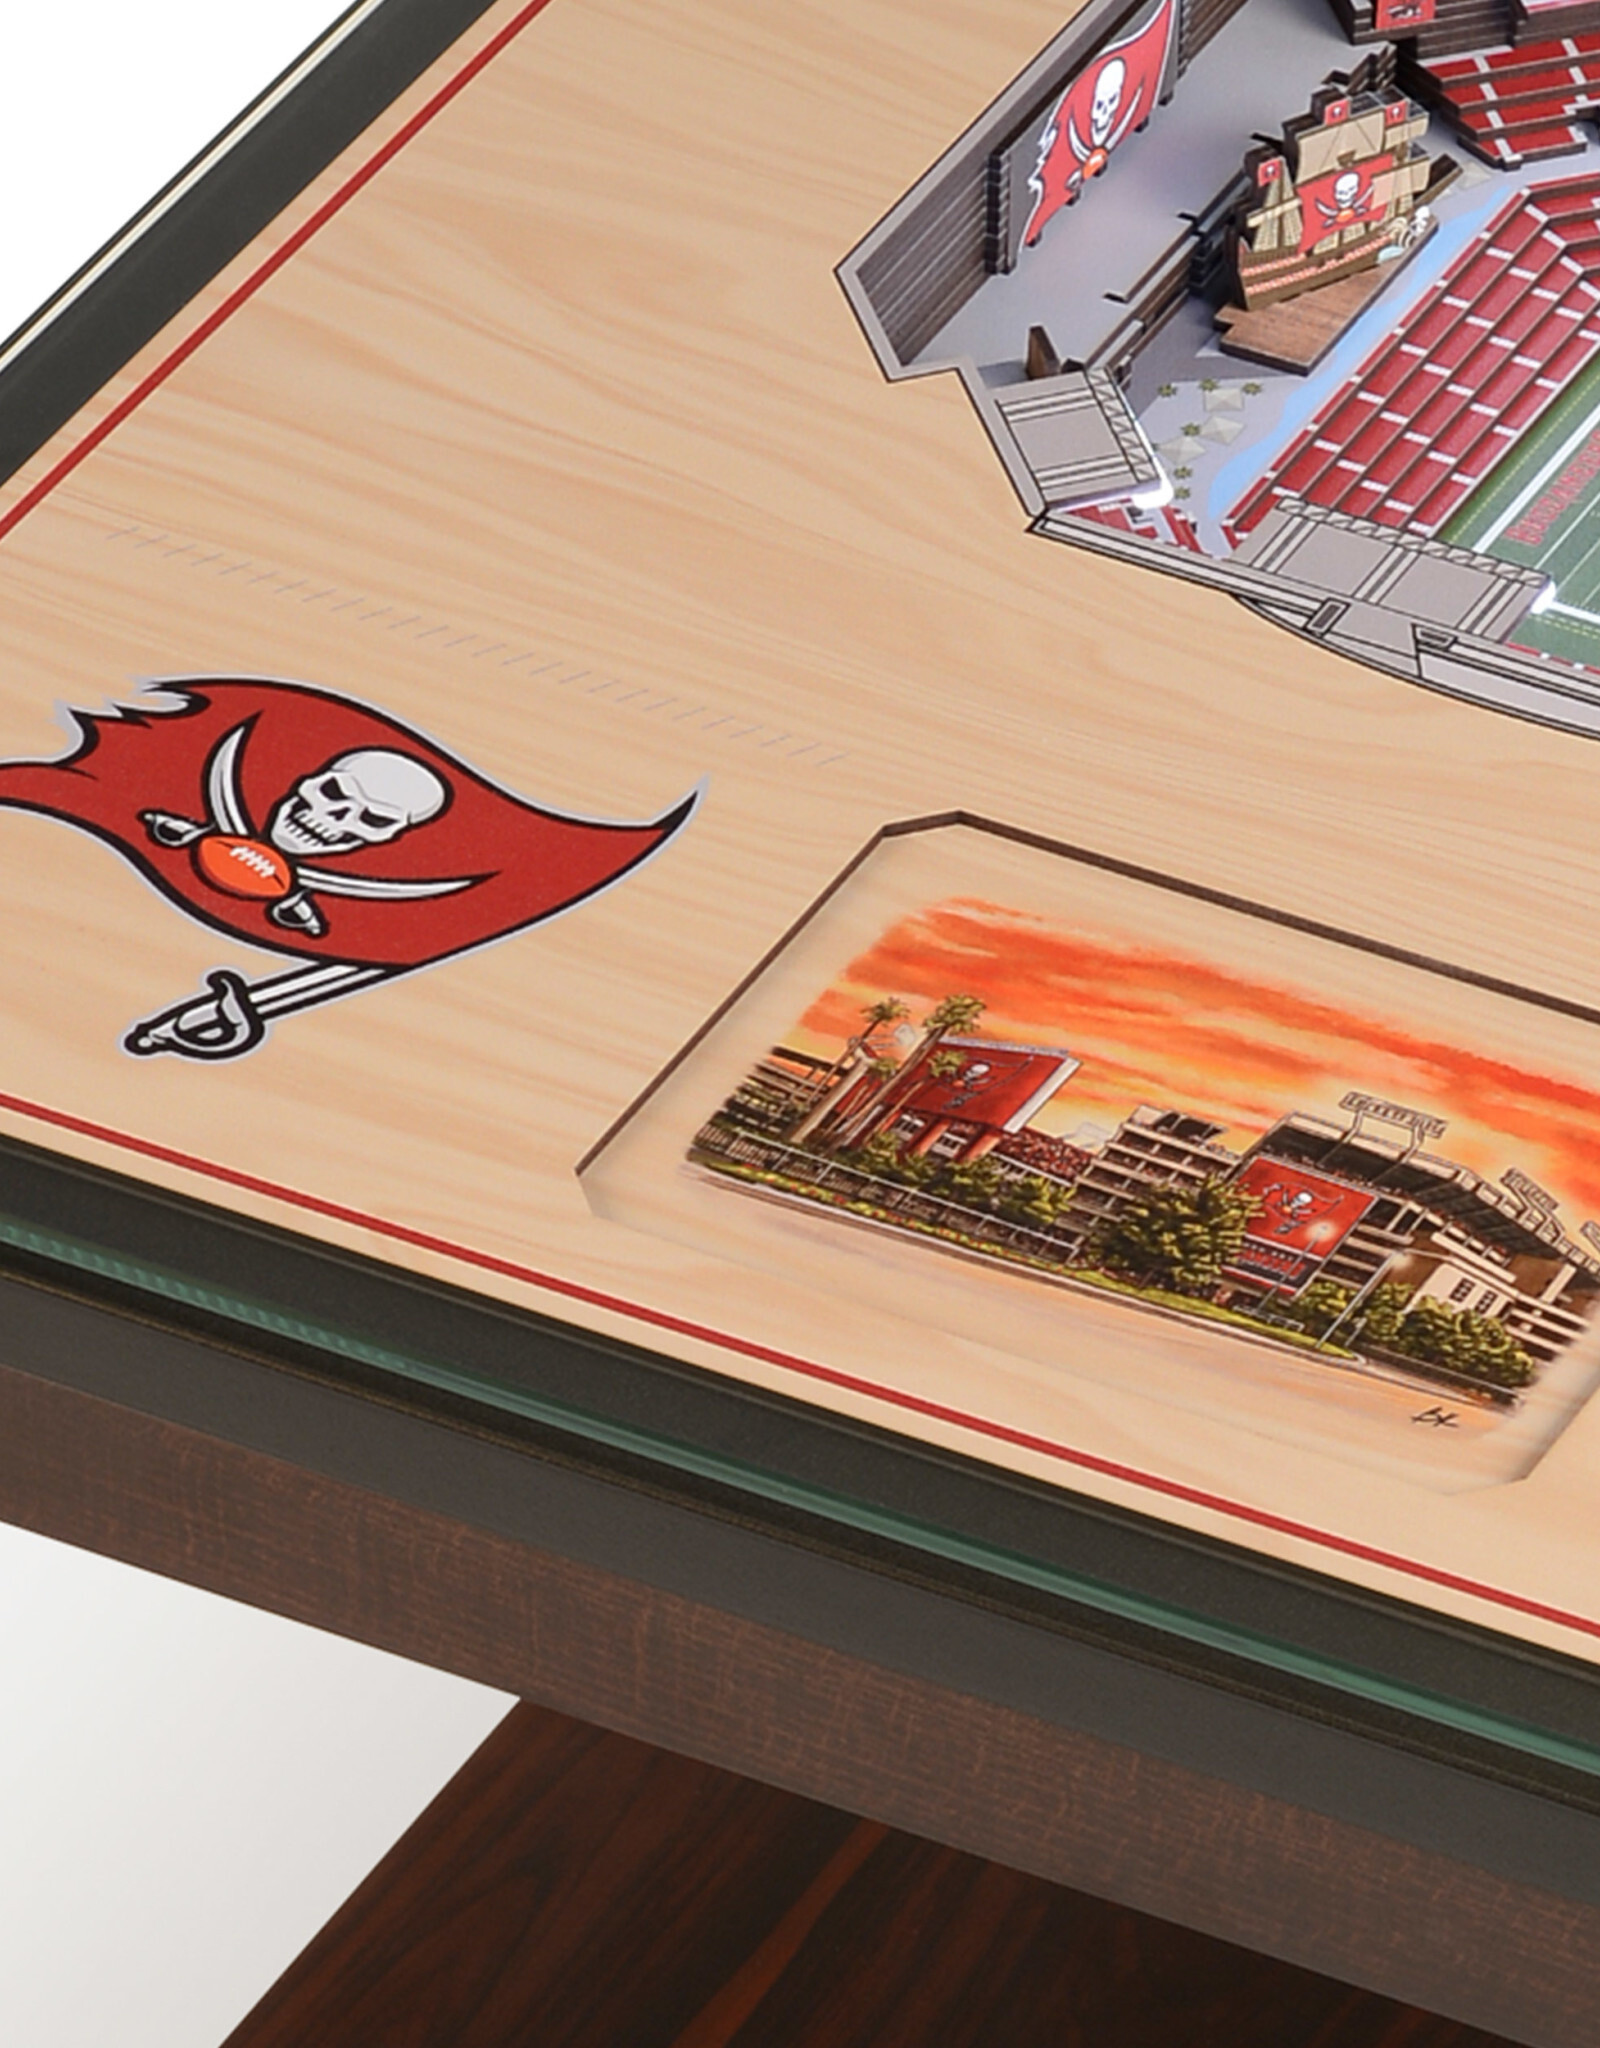 YOU THE FAN Tampa Bay Buccaneers 25-Layer LED StadiumView End Table